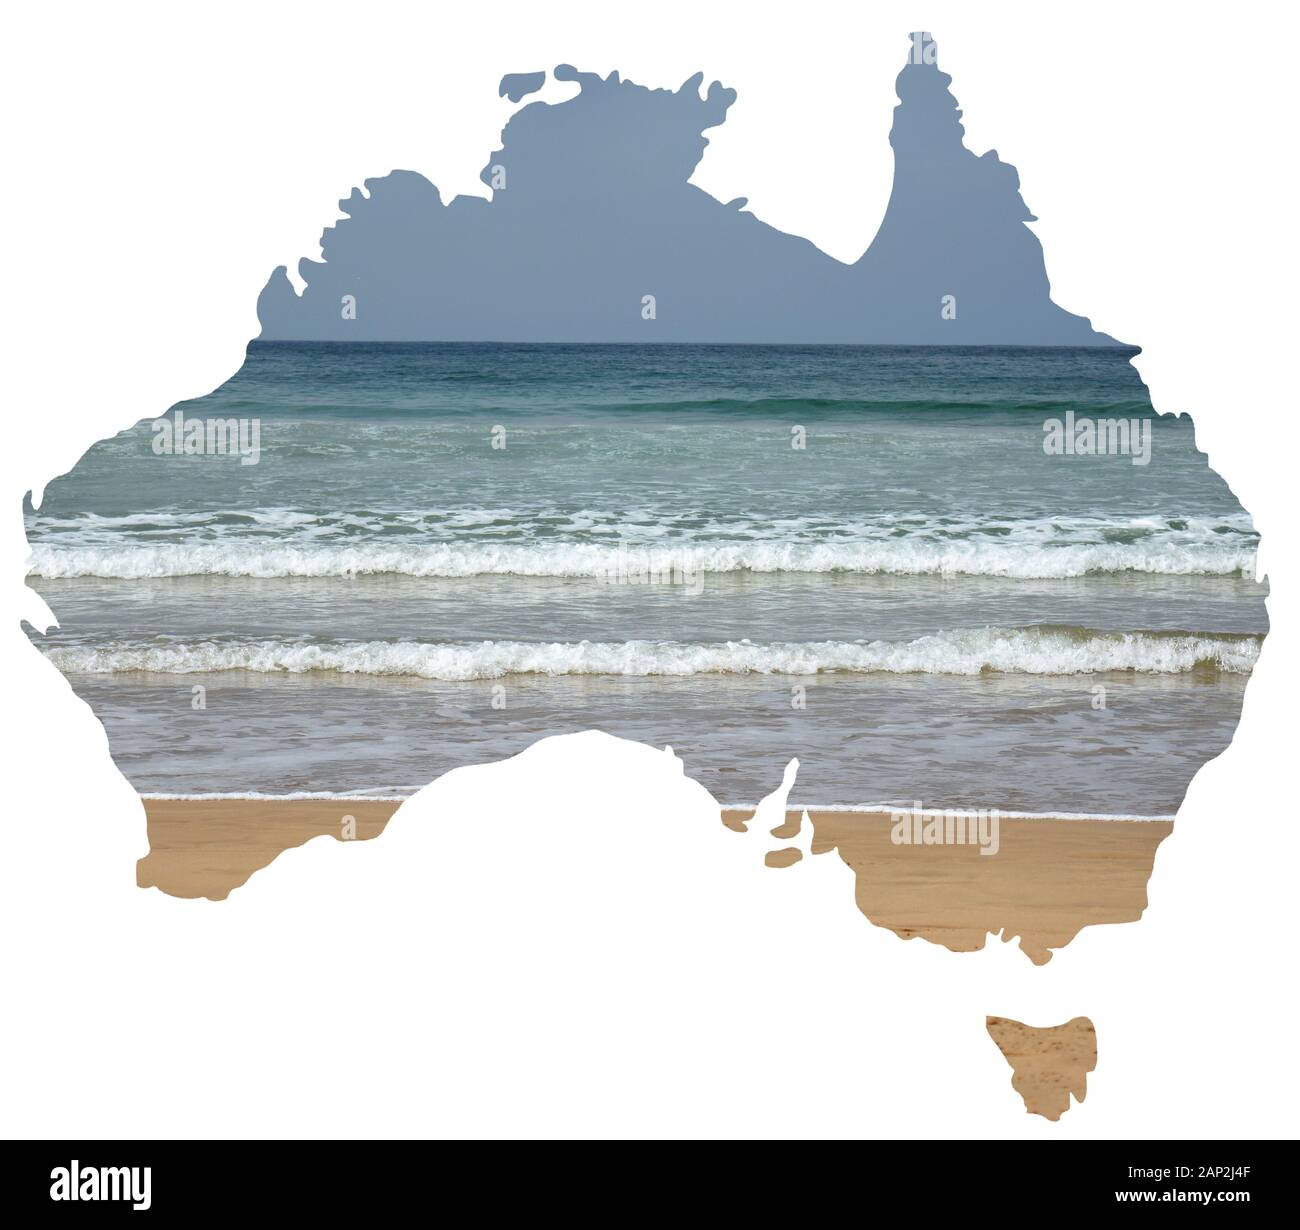 A series of views of the natural landscapes and scenery of Australia set into a map of the country Stock Photo